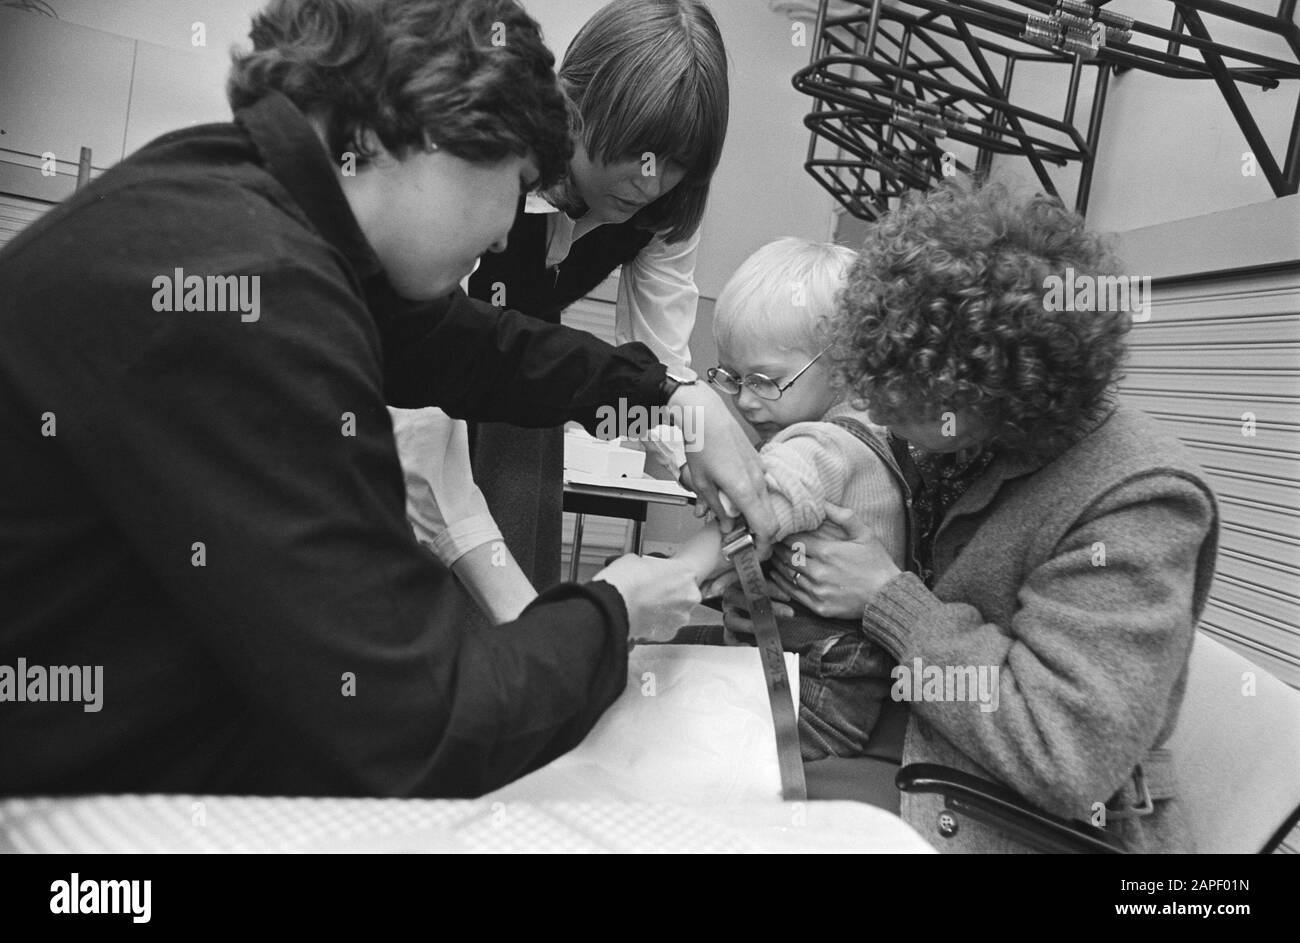 Blood tests for preschoolers living near the Hondorff lead white factory or at school, preschooler gets a shot for blood tests Date: March 24, 1981 Keywords: Kinders, blood tests Stock Photo